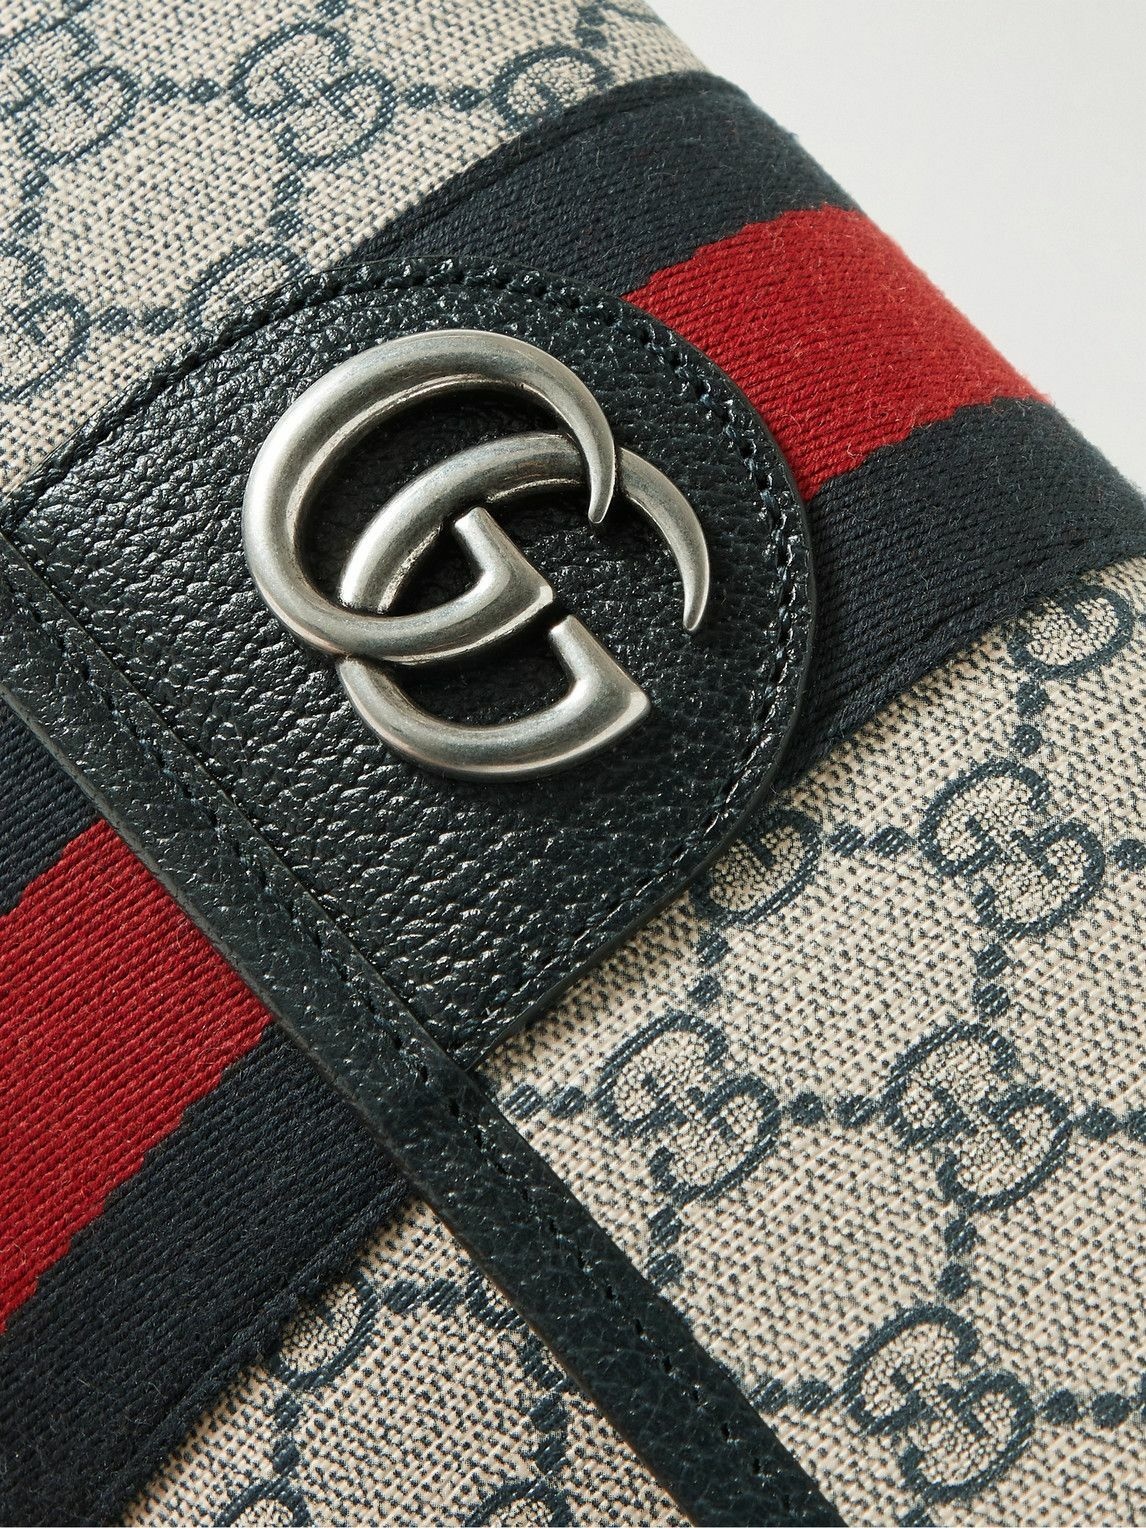 Gucci Ophidia GG Wallet, Blue, GG Canvas